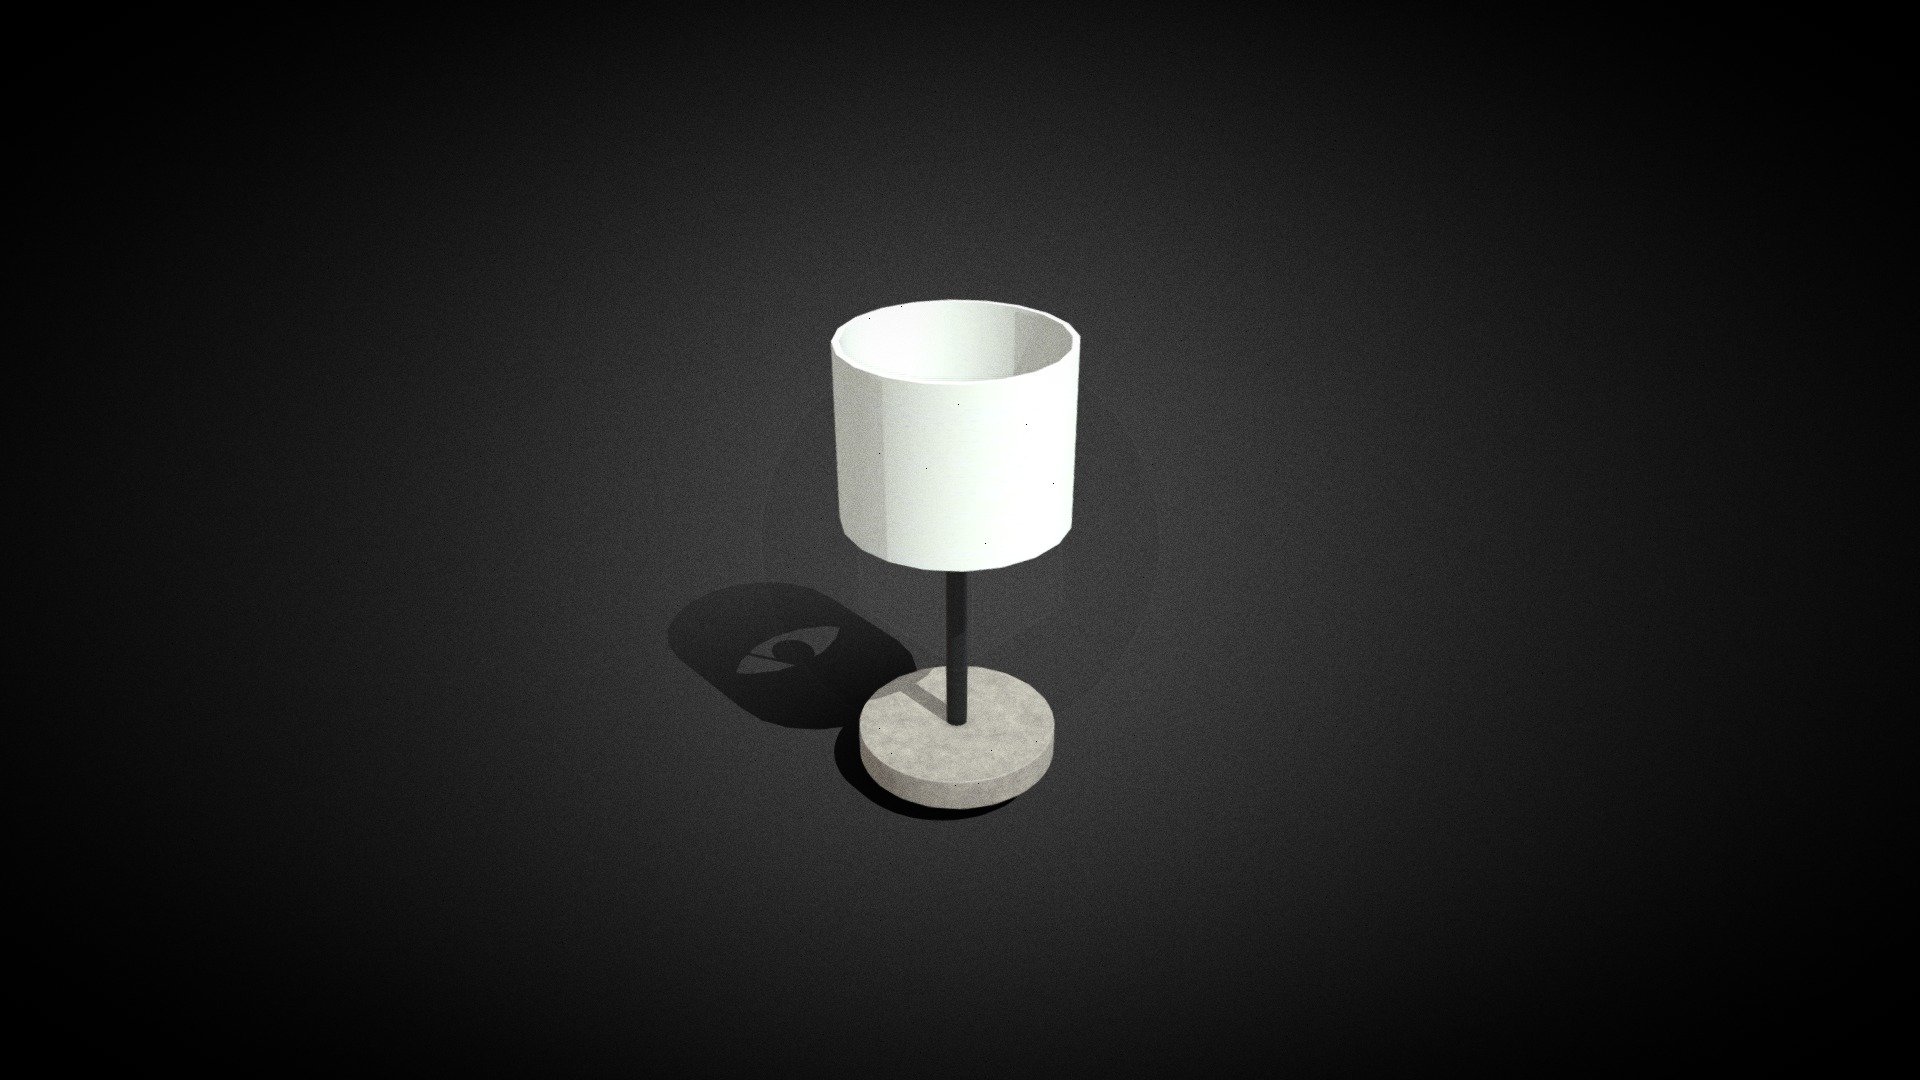 A small table lamp made for gaming ambiance. Project made in Maya 2022 and textured with the help of Sketchfab 3d model